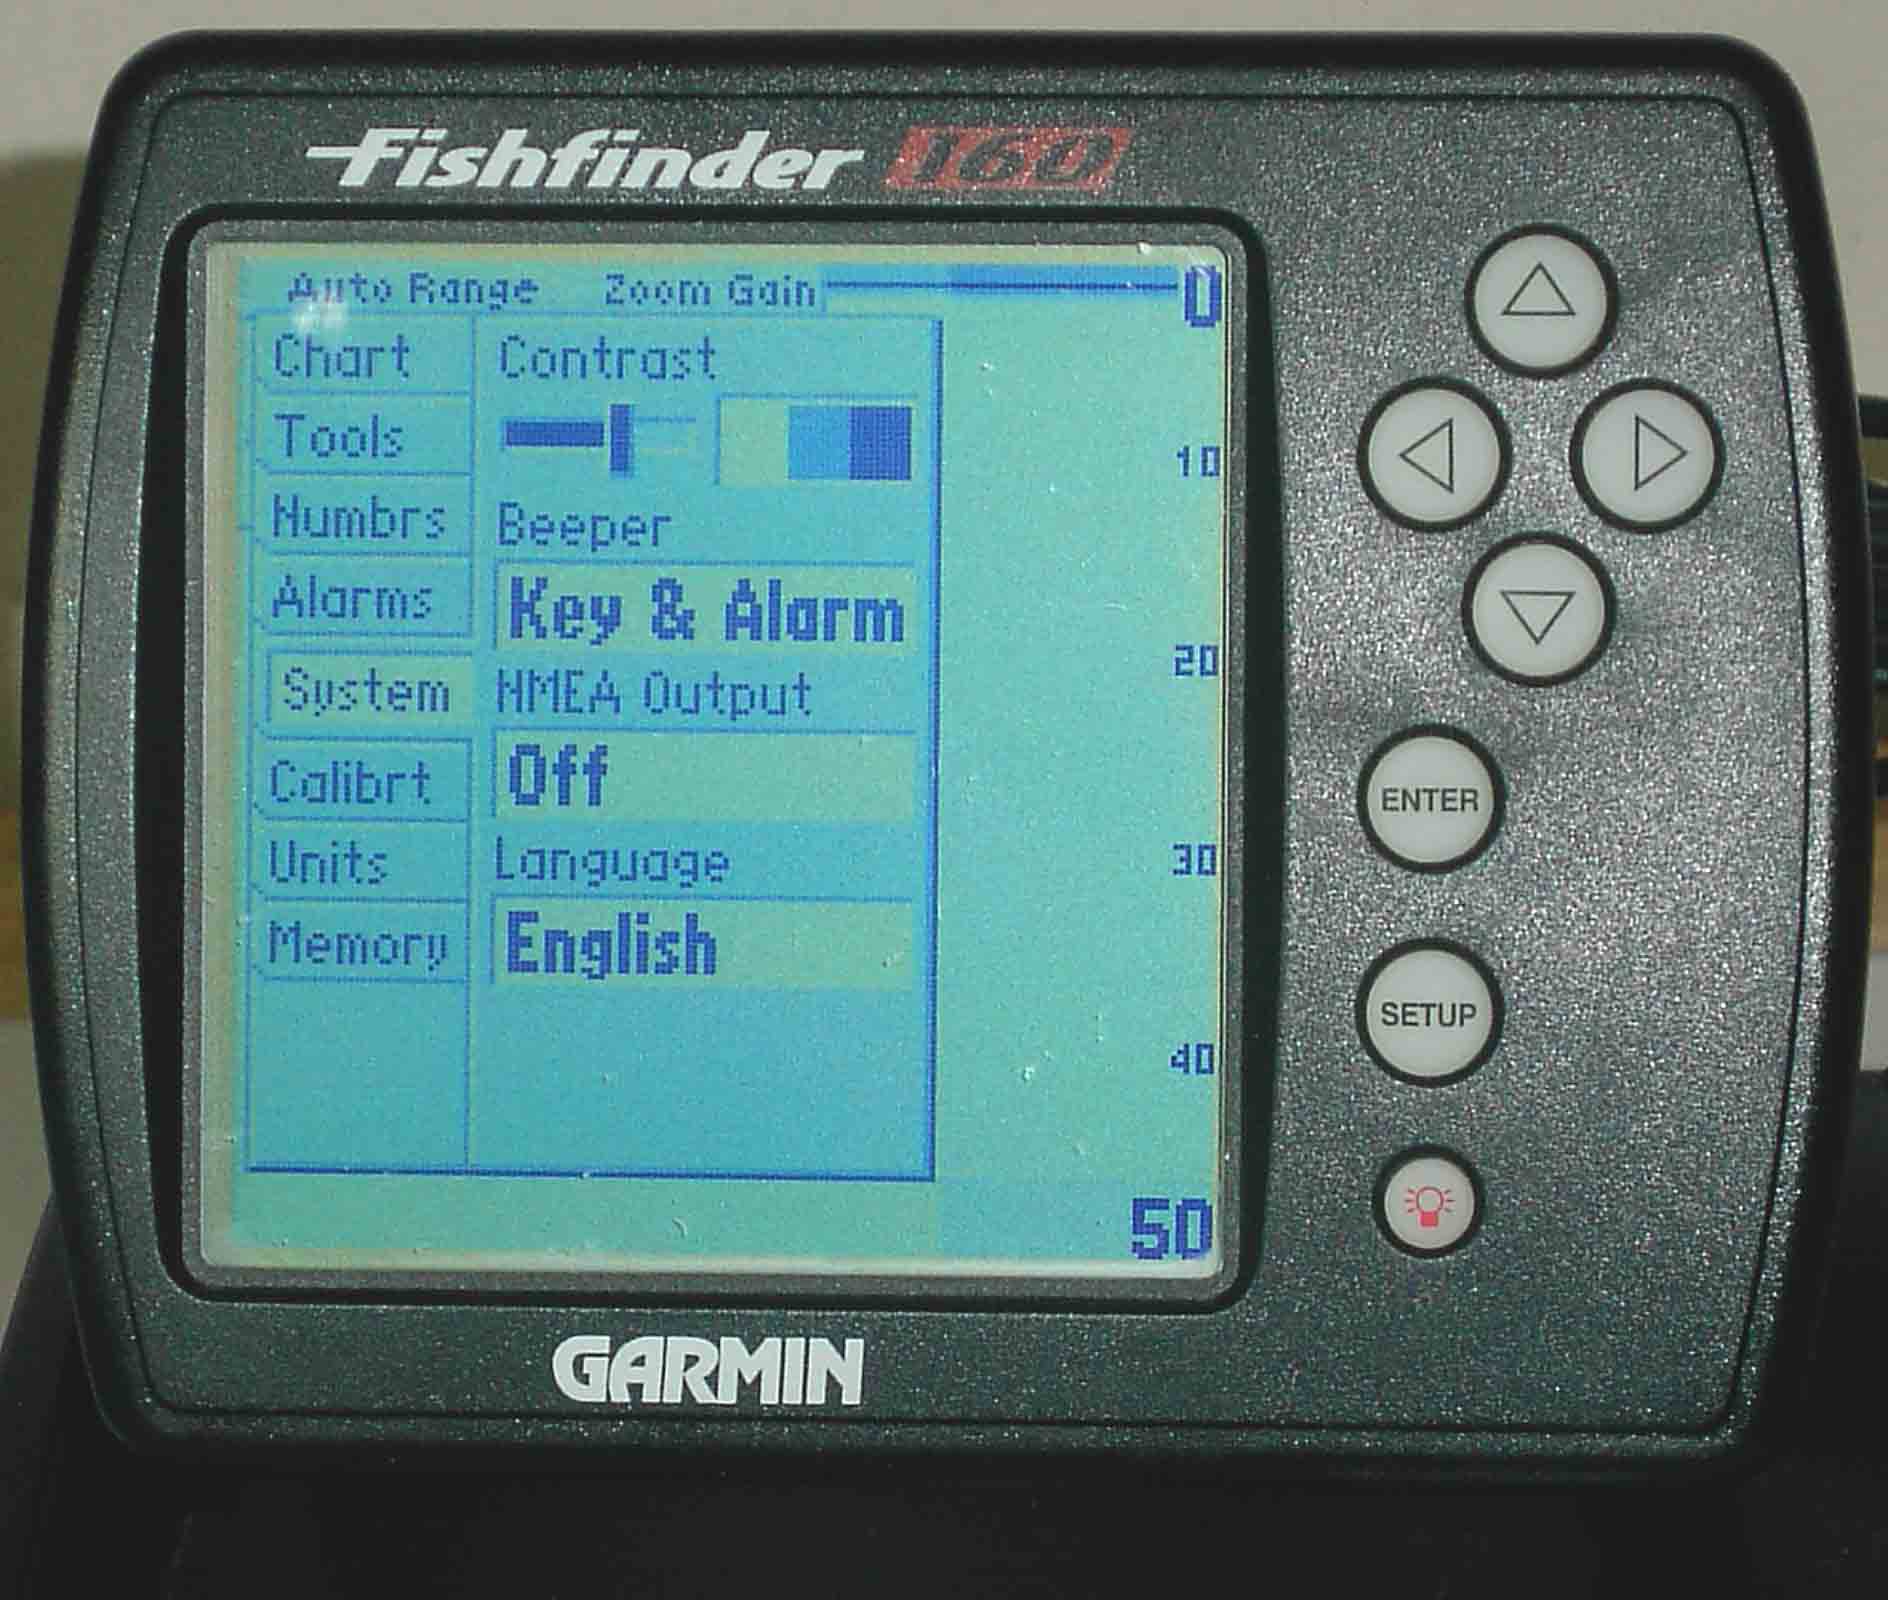 Garmin Fishfinder 160 Portable Depth Finder with Transducer & Power Cable - Classified Ads | Outdoors